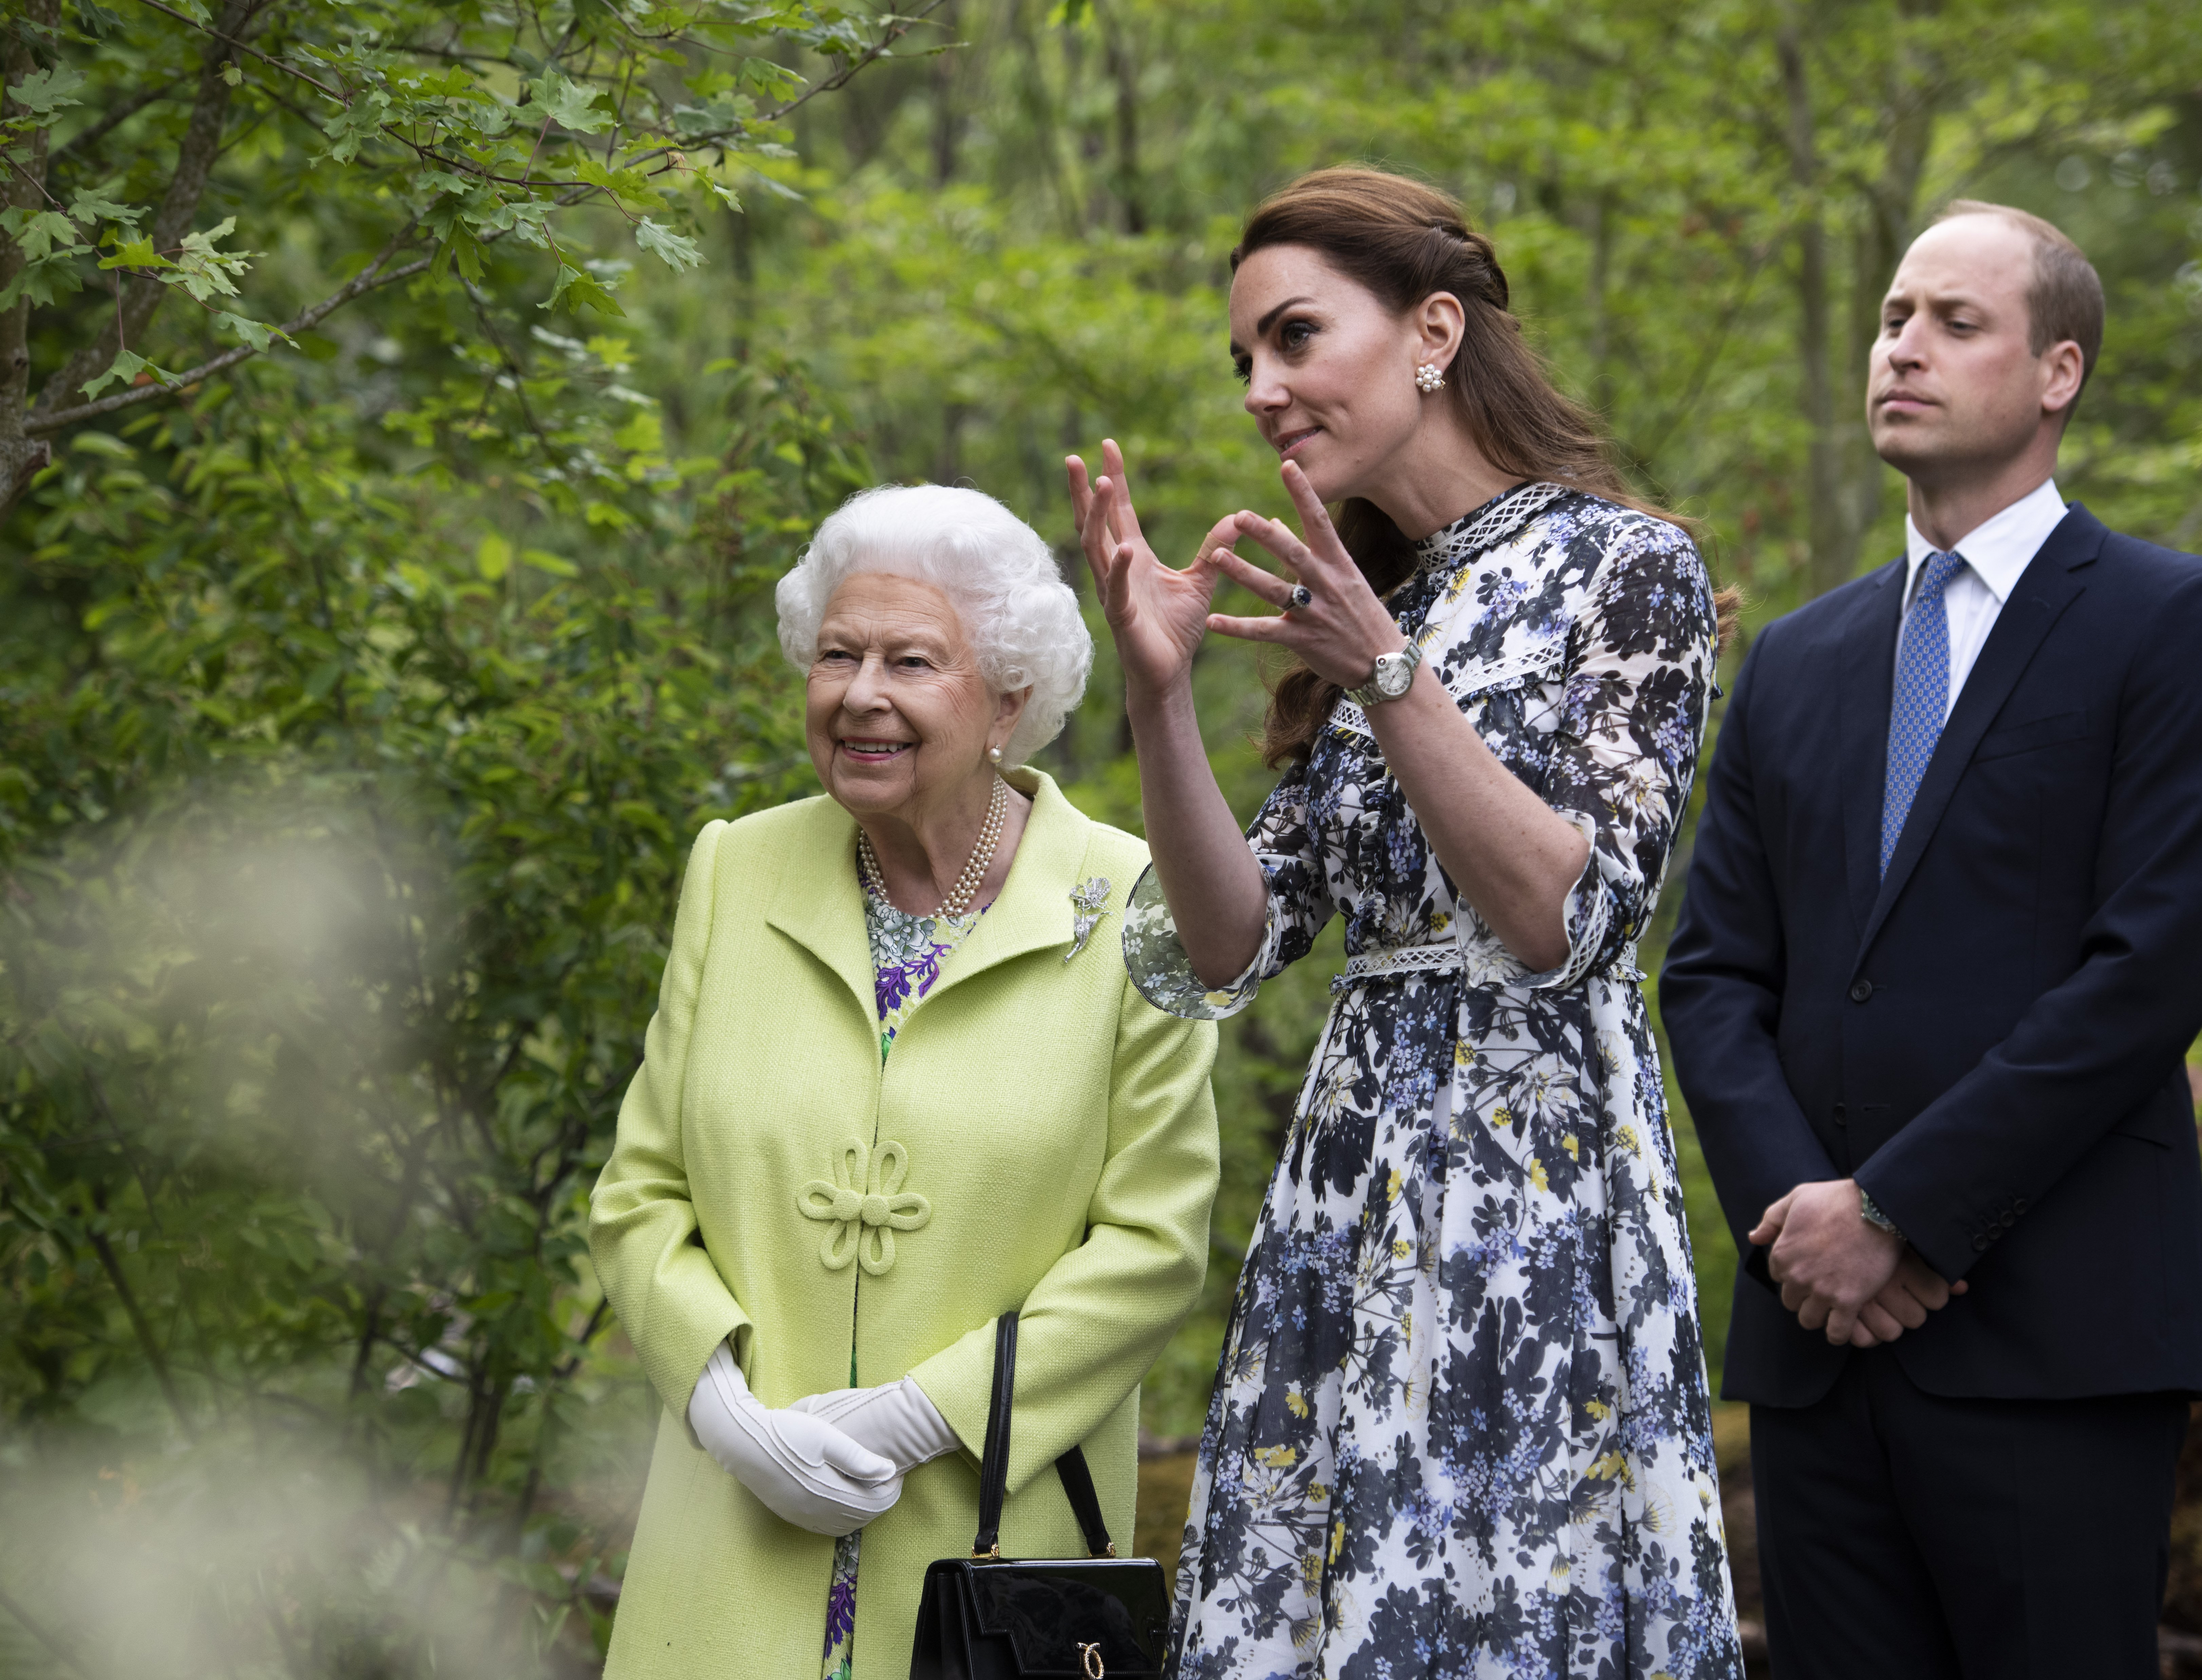 Queen Elizabeth II is shown around 'Back to Nature by Prince William and Catherine, Duchess of Cambridge at the Chelsea Flower Show on May 20, 2019, in London, England.| Source: Getty Images